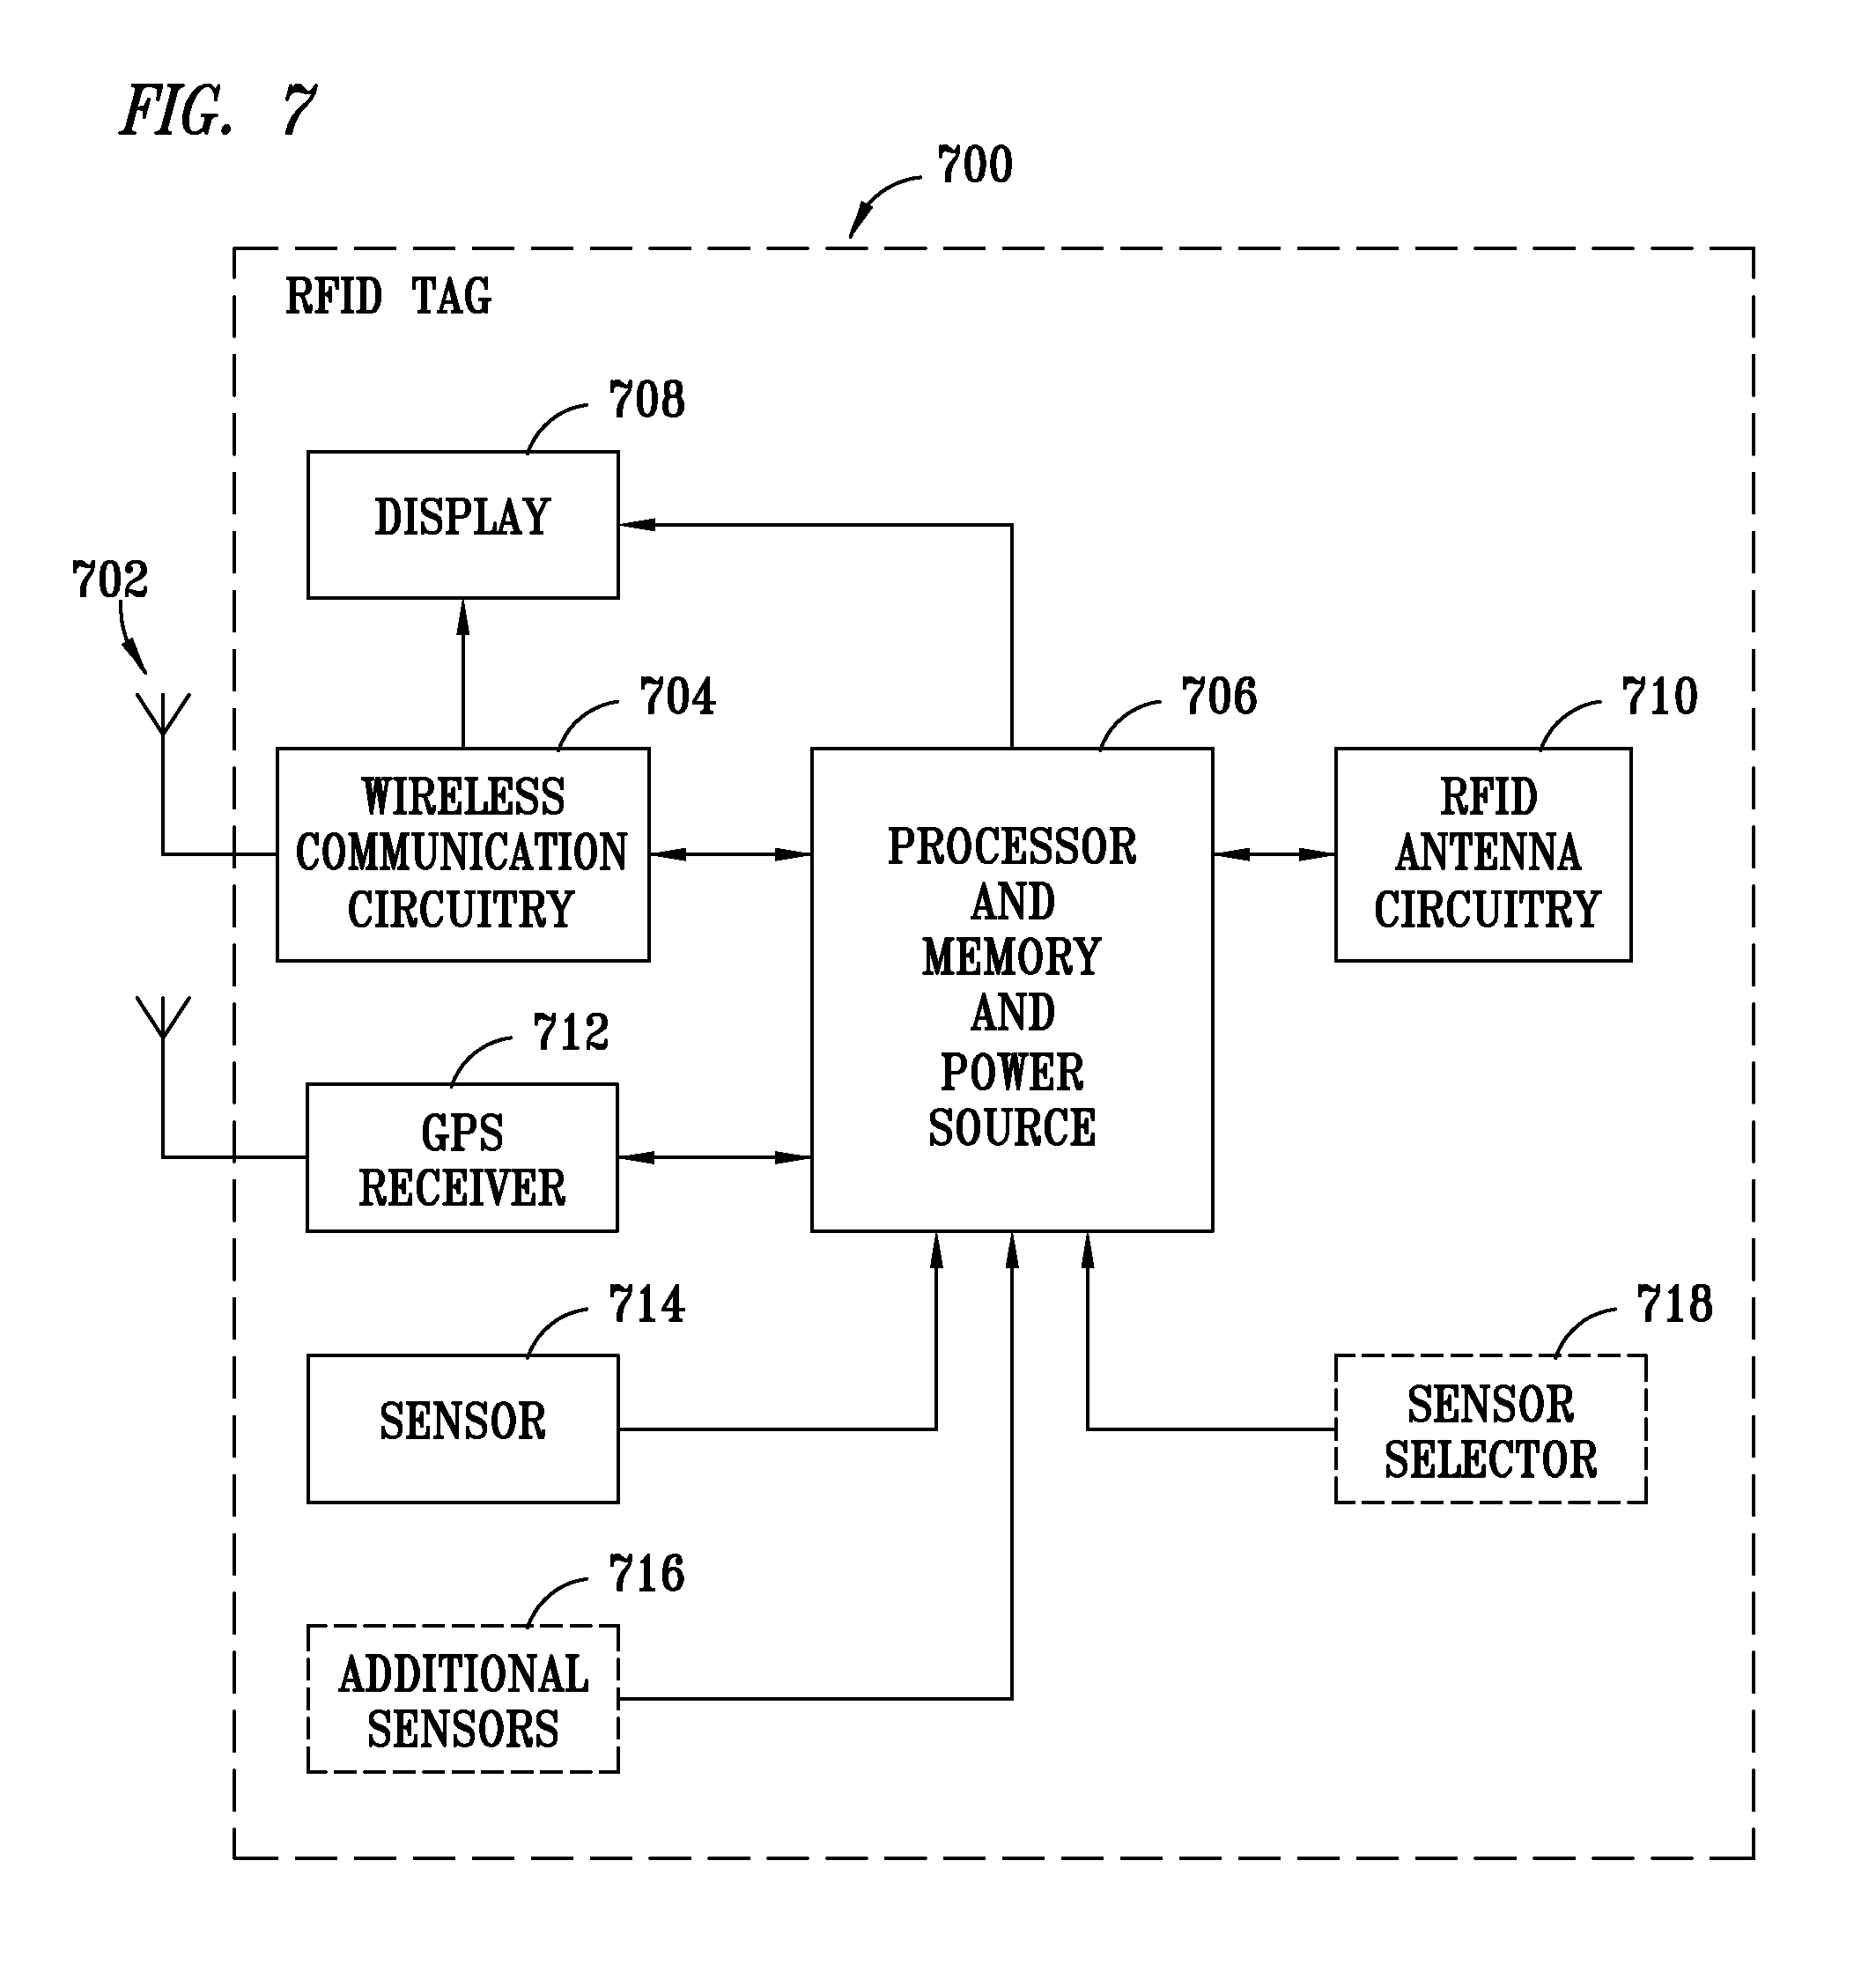 Method and apparatus for autonomous detection of a given location or situation